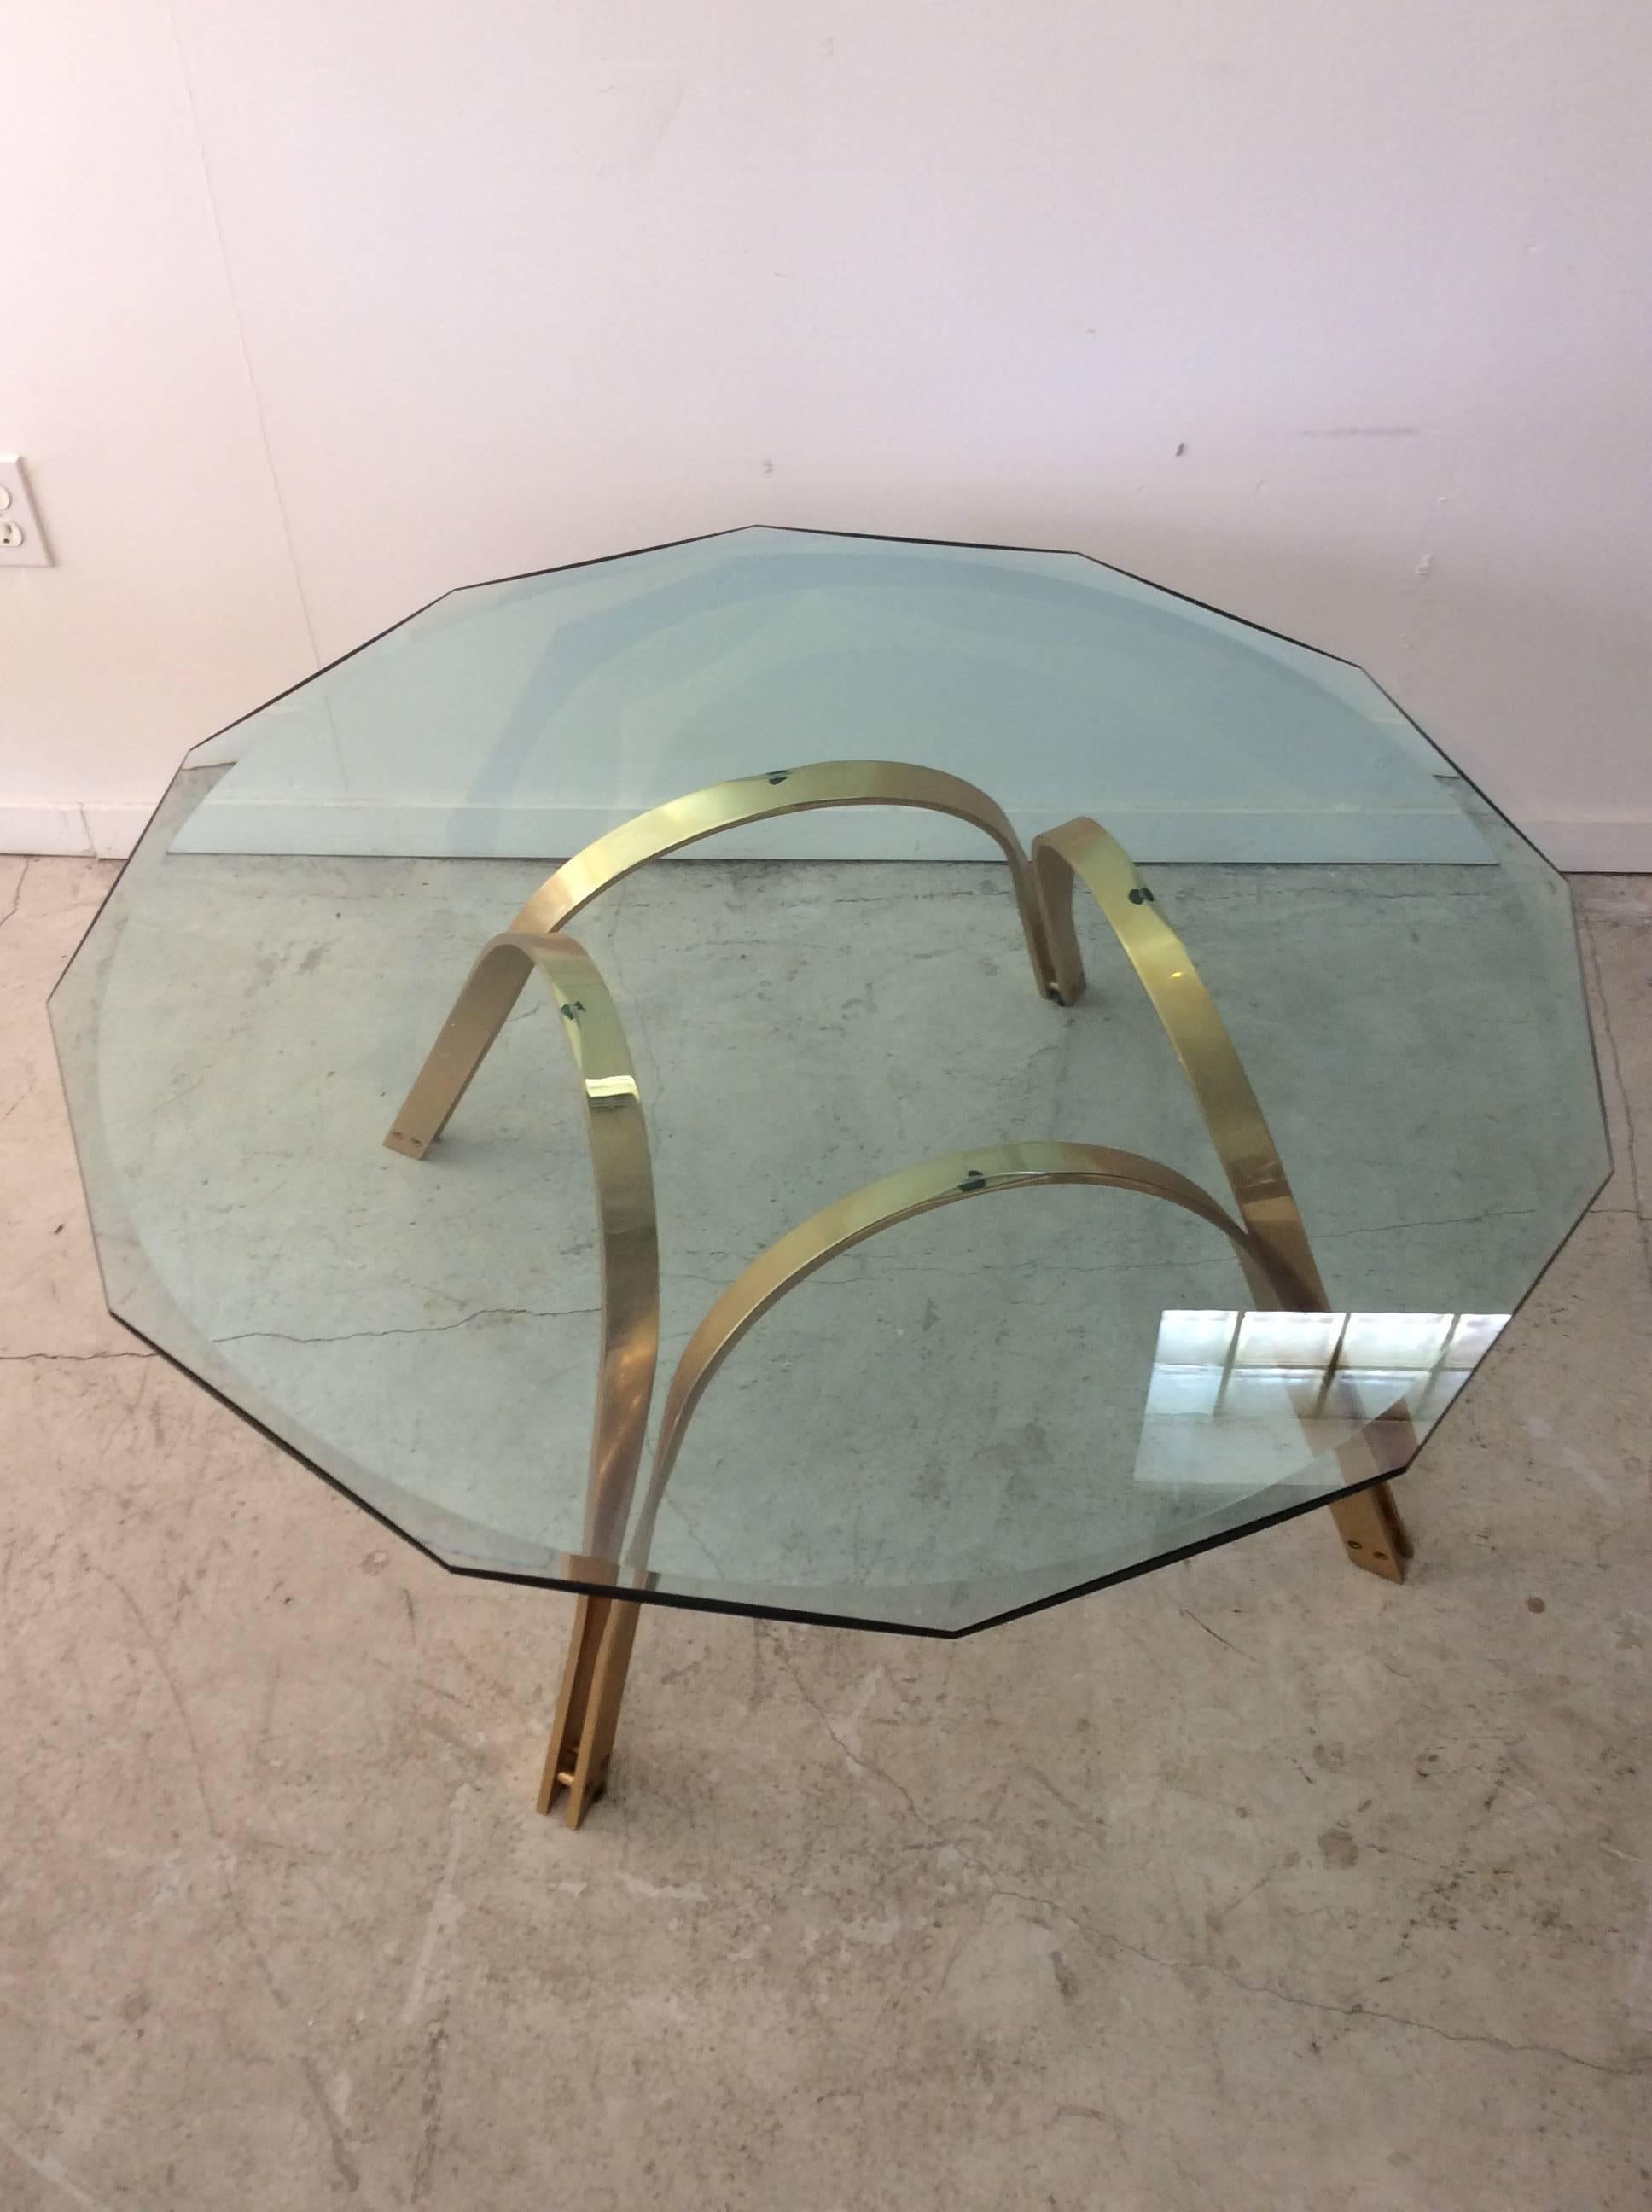 You are looking at a Mid-Century Modern coffee table designed by Roger Sprunger for Dunbar. The base is made of solid metal with a brass plating finish. This base could be used in two different positions as I've shown in the photos and has a spread